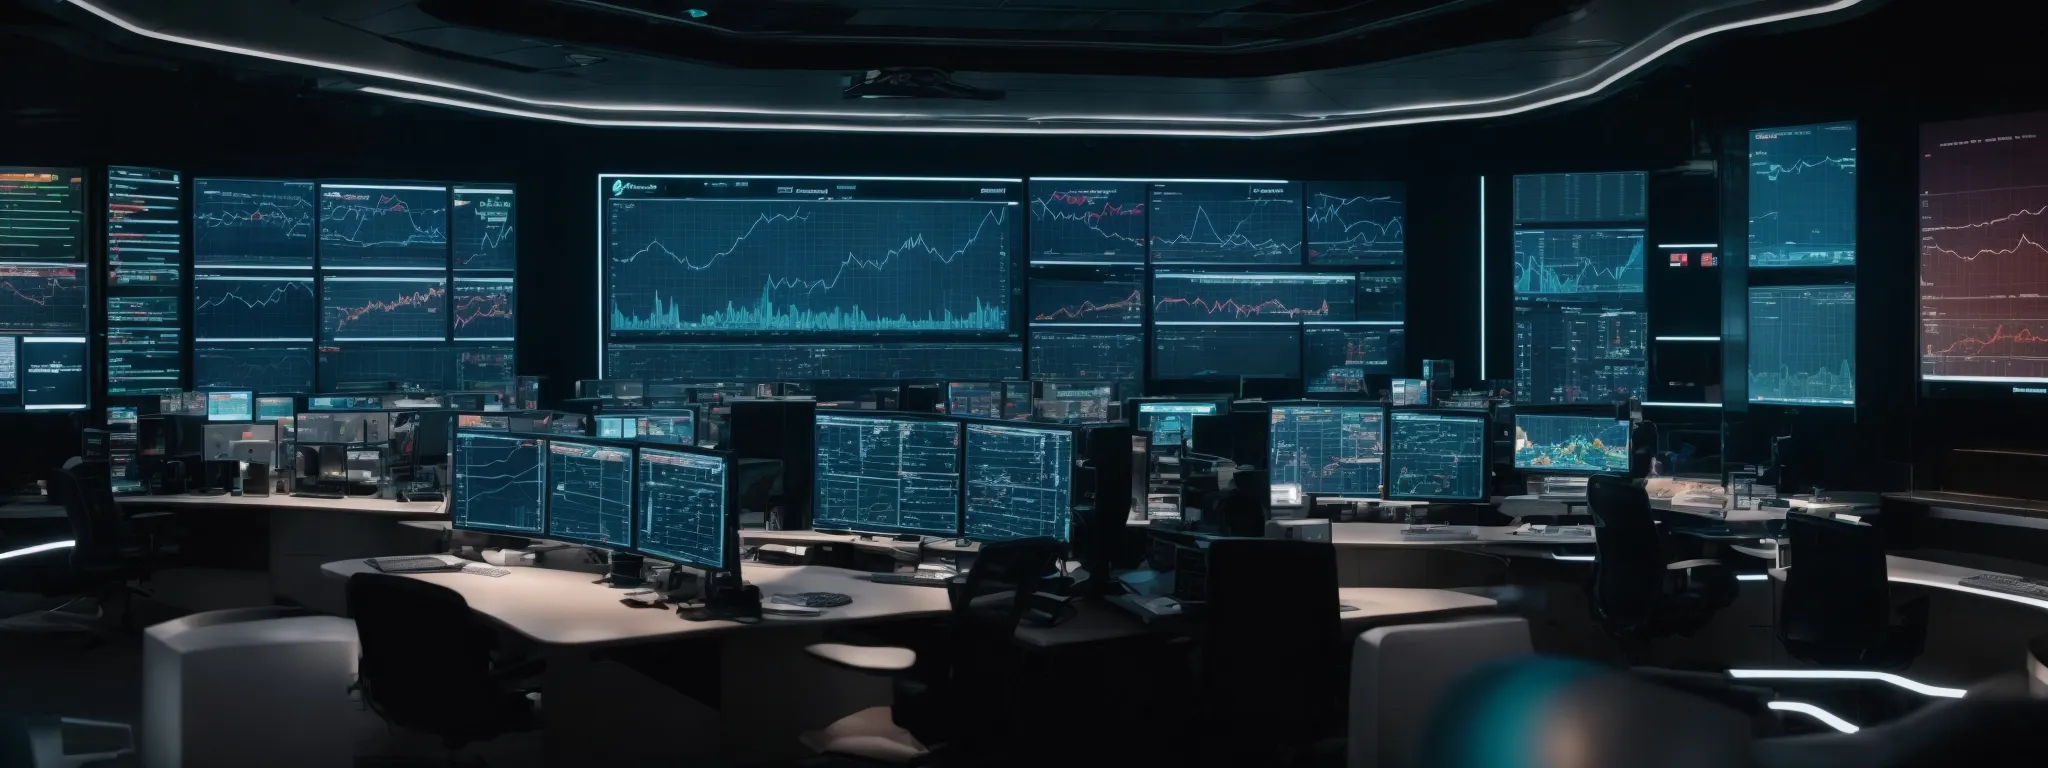 a futuristic control room with screens displaying graphs and predictive models, highlighting strategic decision-making in digital marketing.